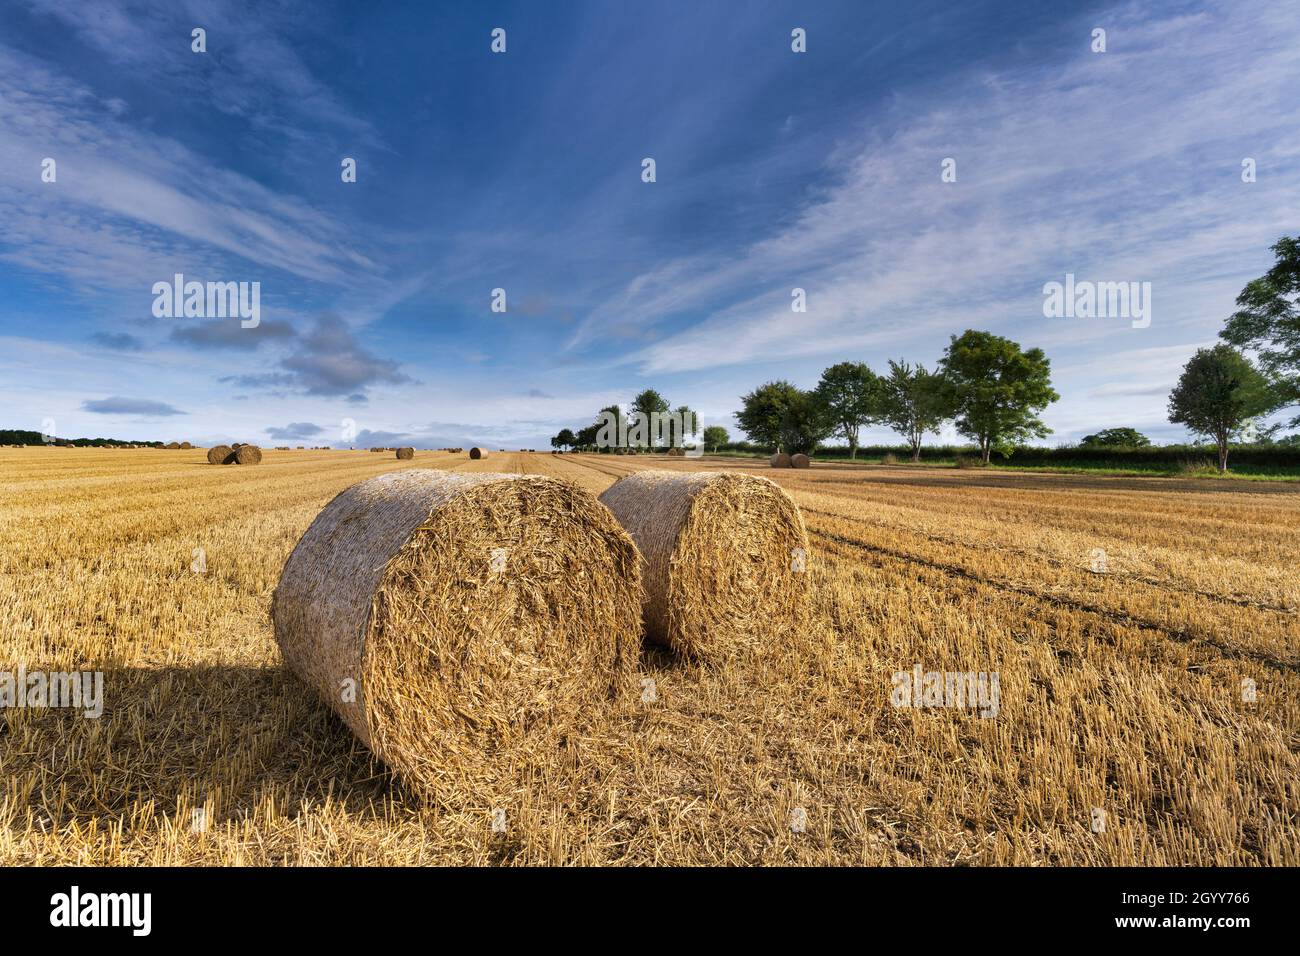 Hay bales in a corn field near Aislaby, north Yorkshire, England. Stock Photo